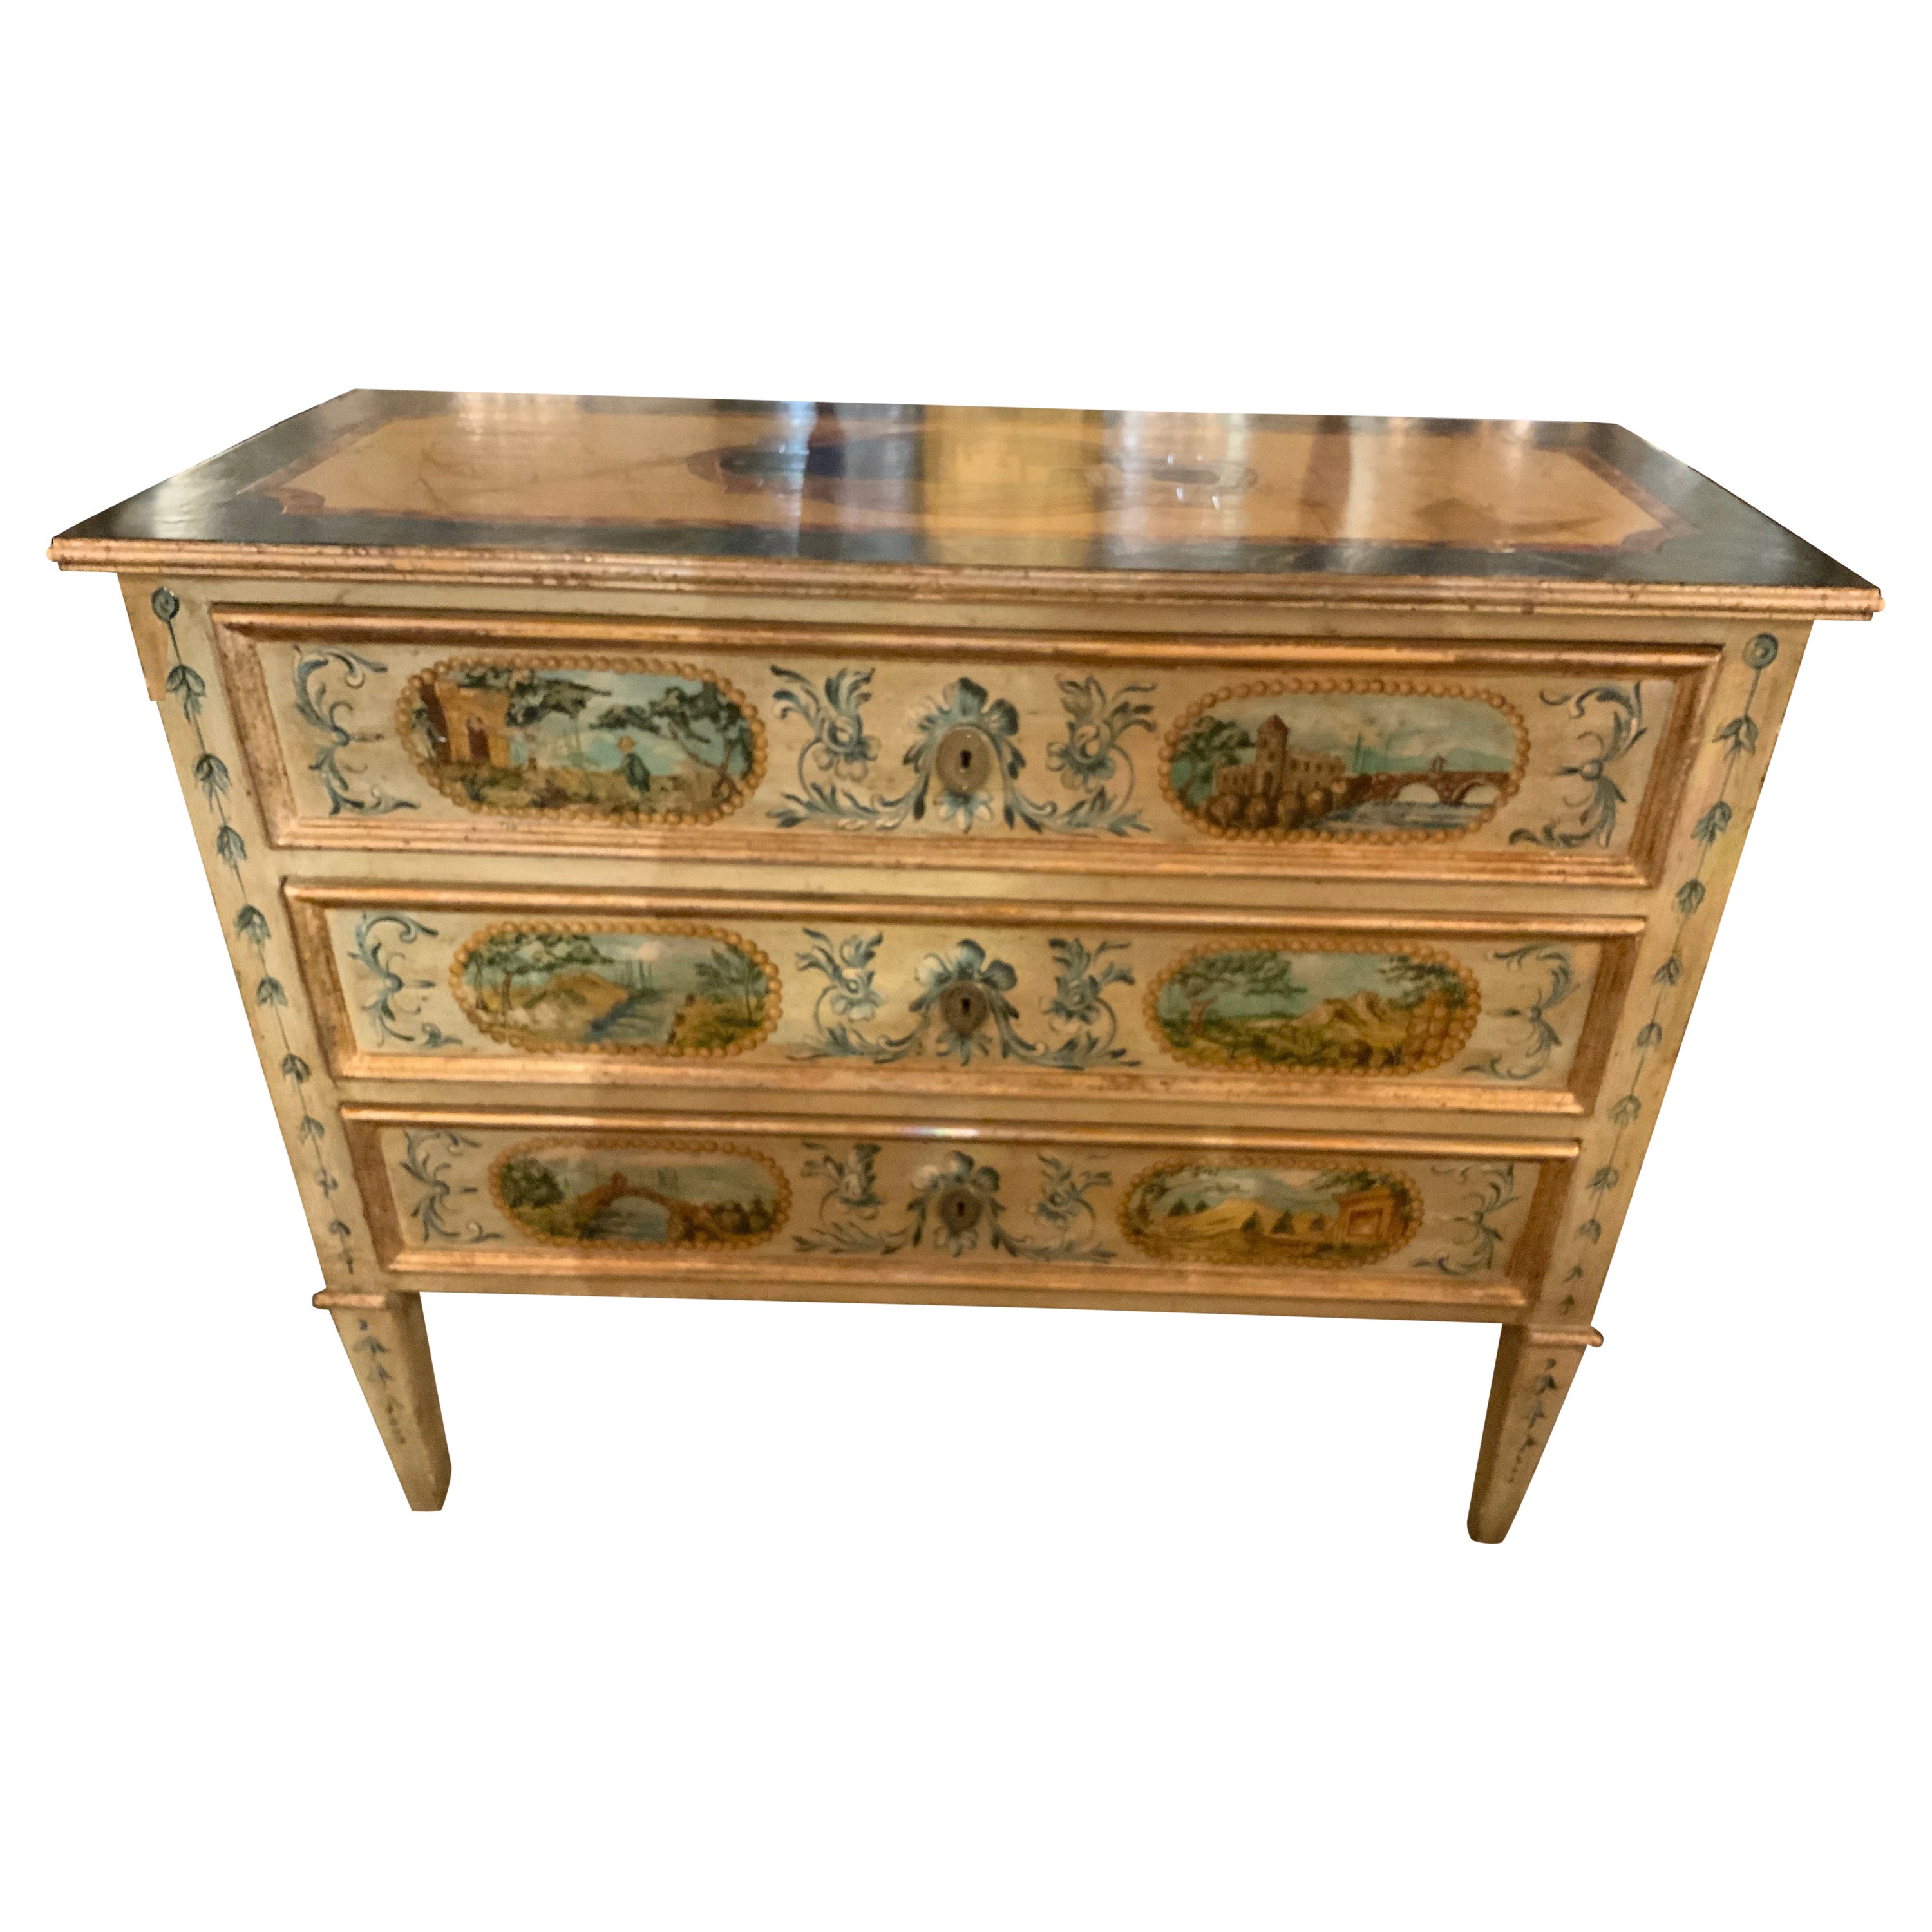 Venetian-Style Commode in the Neoclassical Taste, Hand Painted